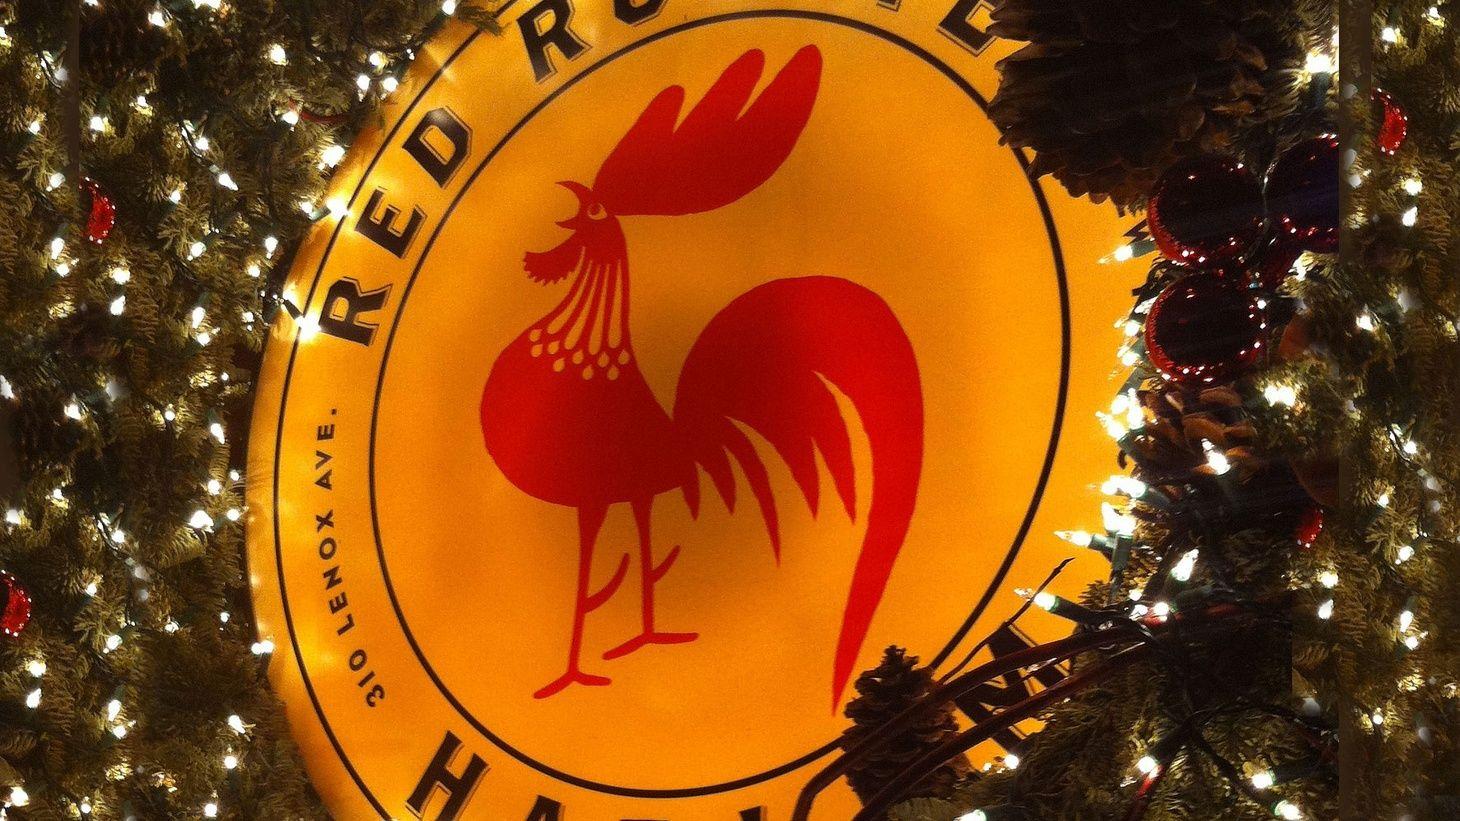 Black and Red Rooster Restaurant Logo - The Red Rooster, Fidel the foodie, P.Y.T. Good Food. Food